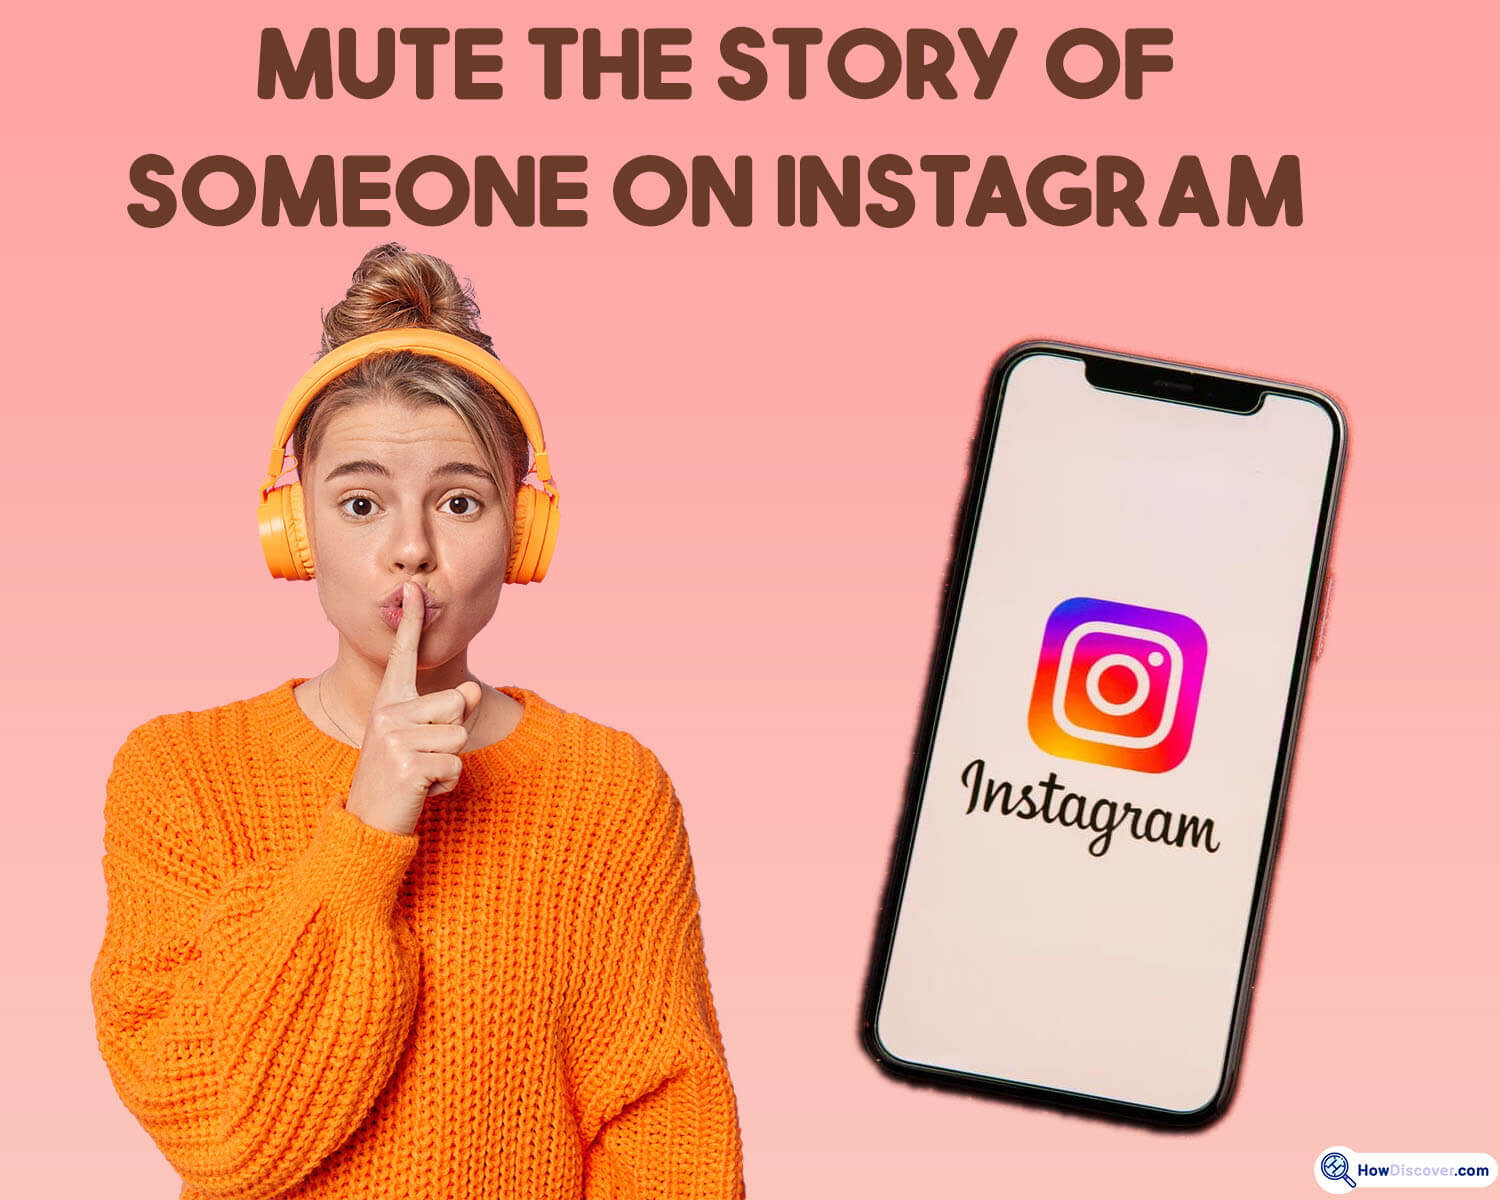 How Do You Mute & Unmute Someone on Instagram - How to mute the Story of someone on Instagram